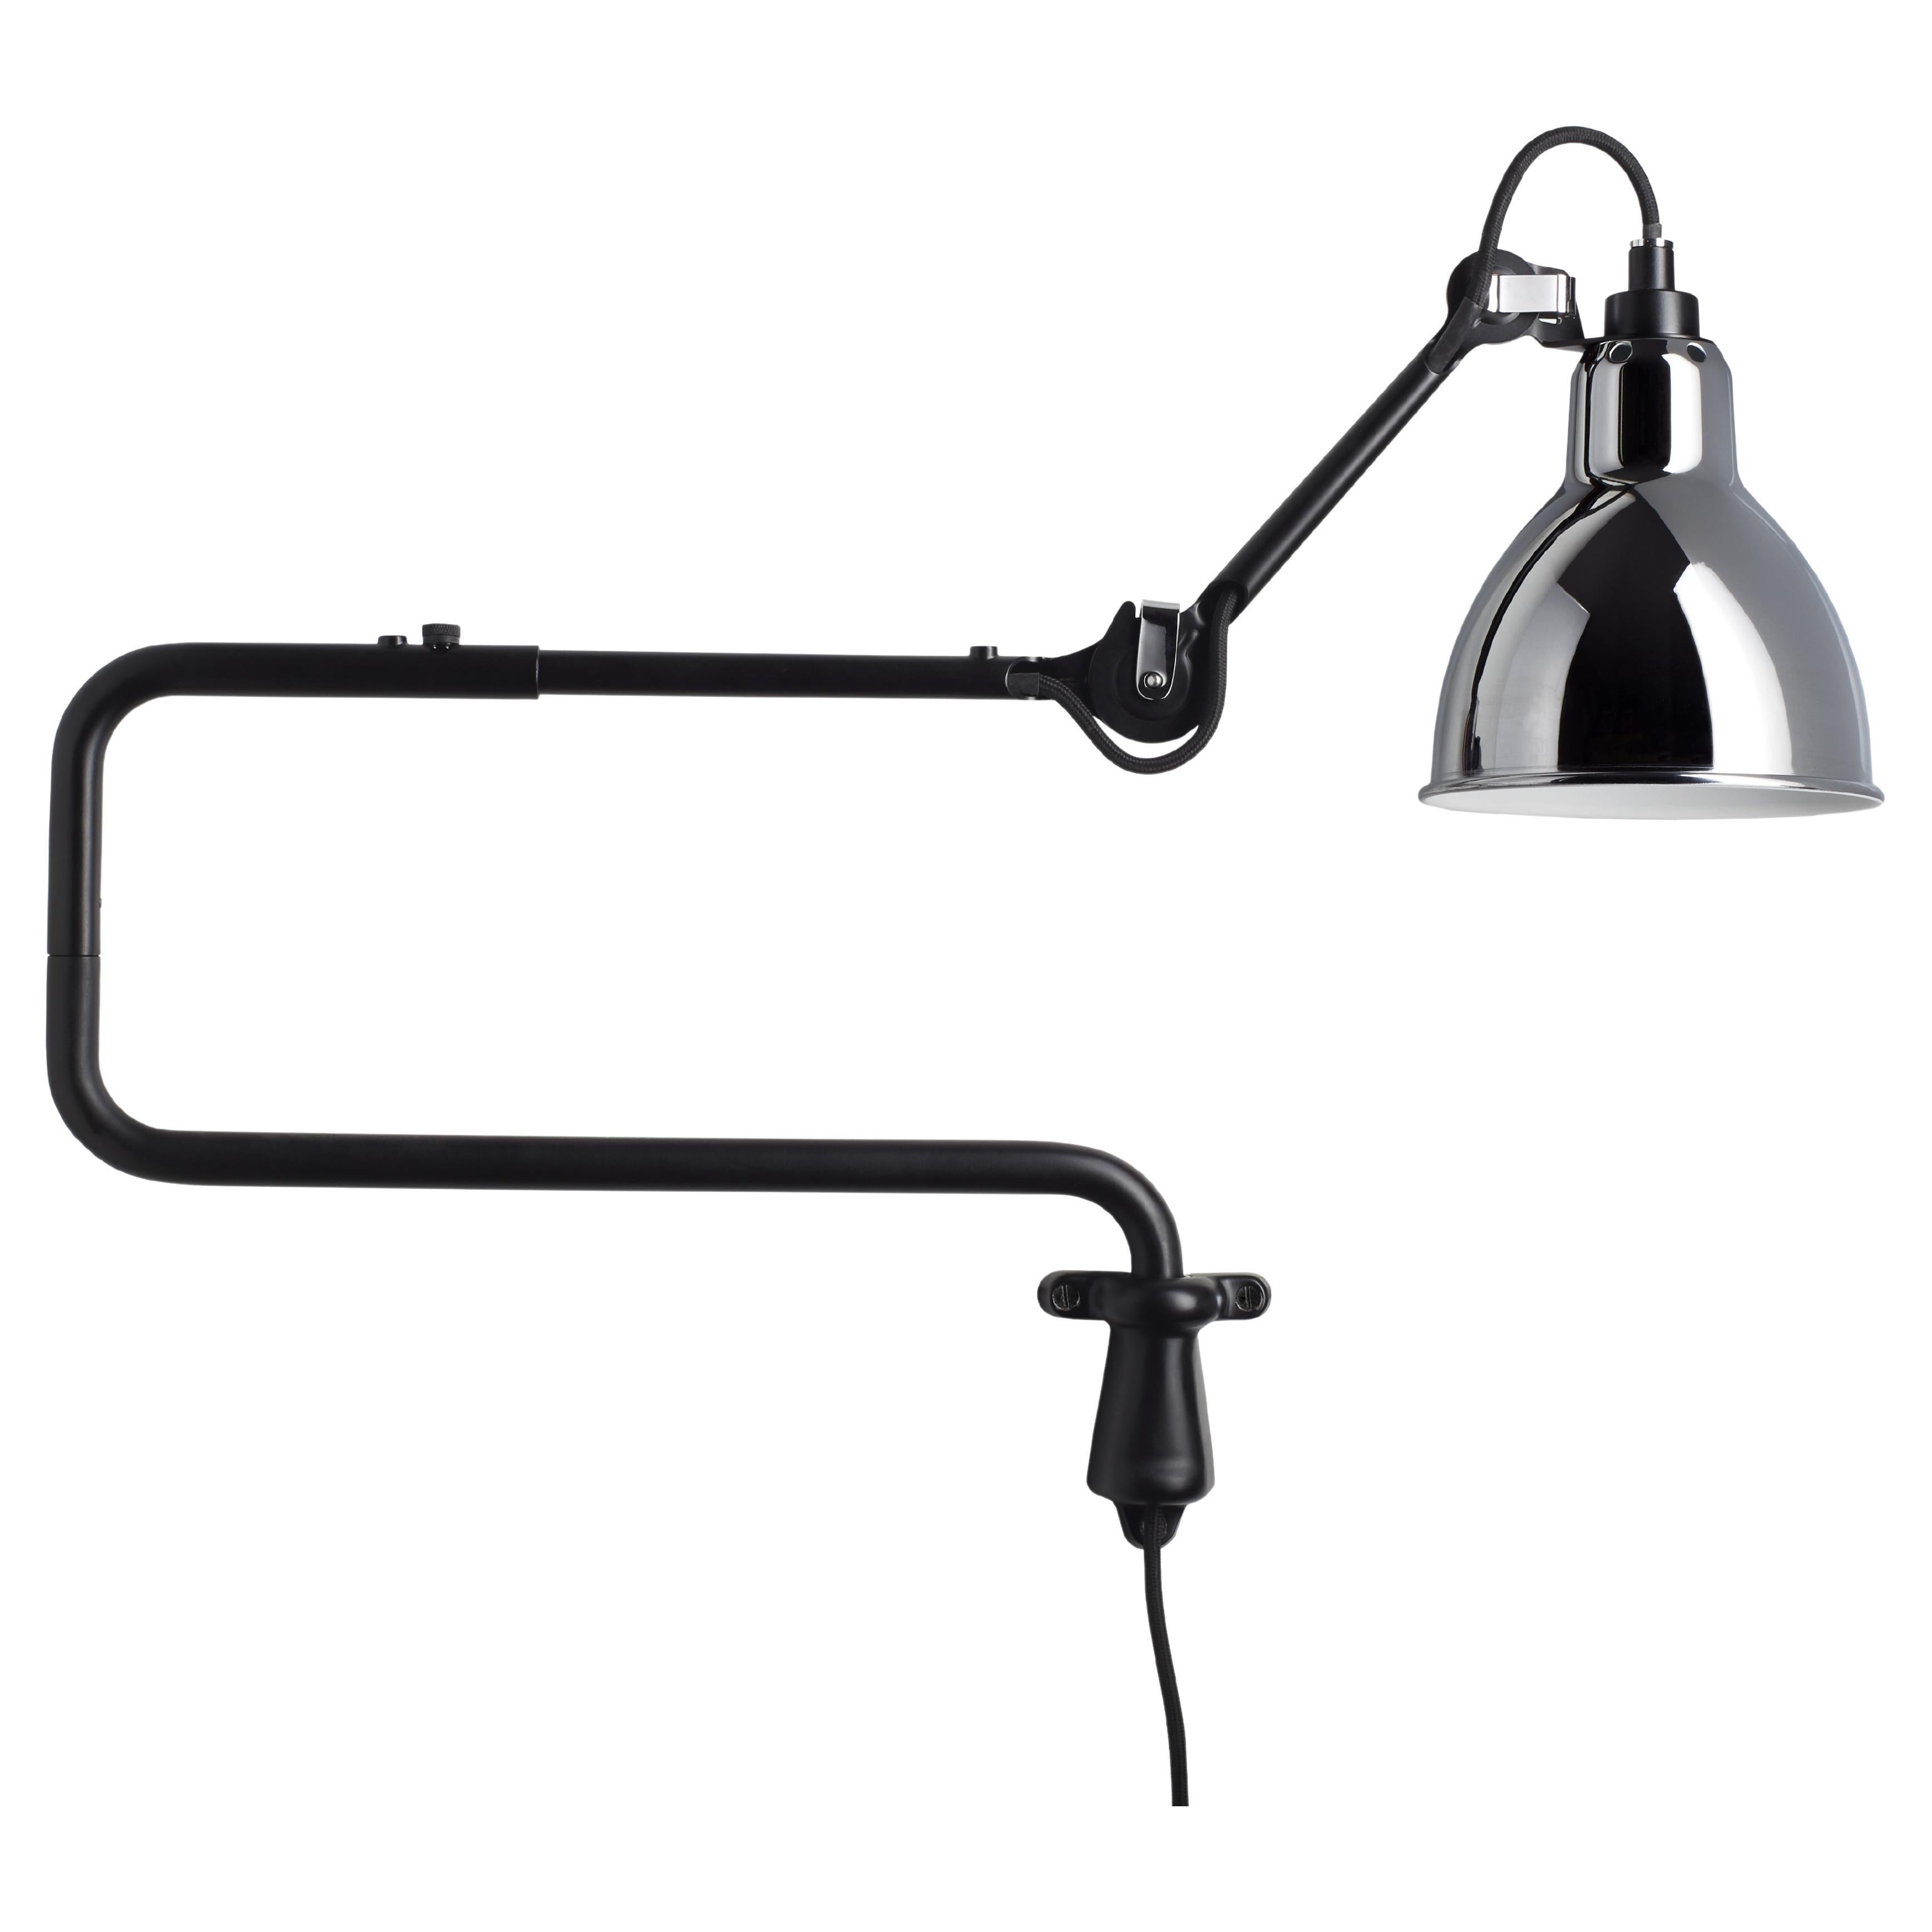 DCW Editions La Lampe Gras N°303 Wall Lamp in Black Arm and Chrome Shade For Sale